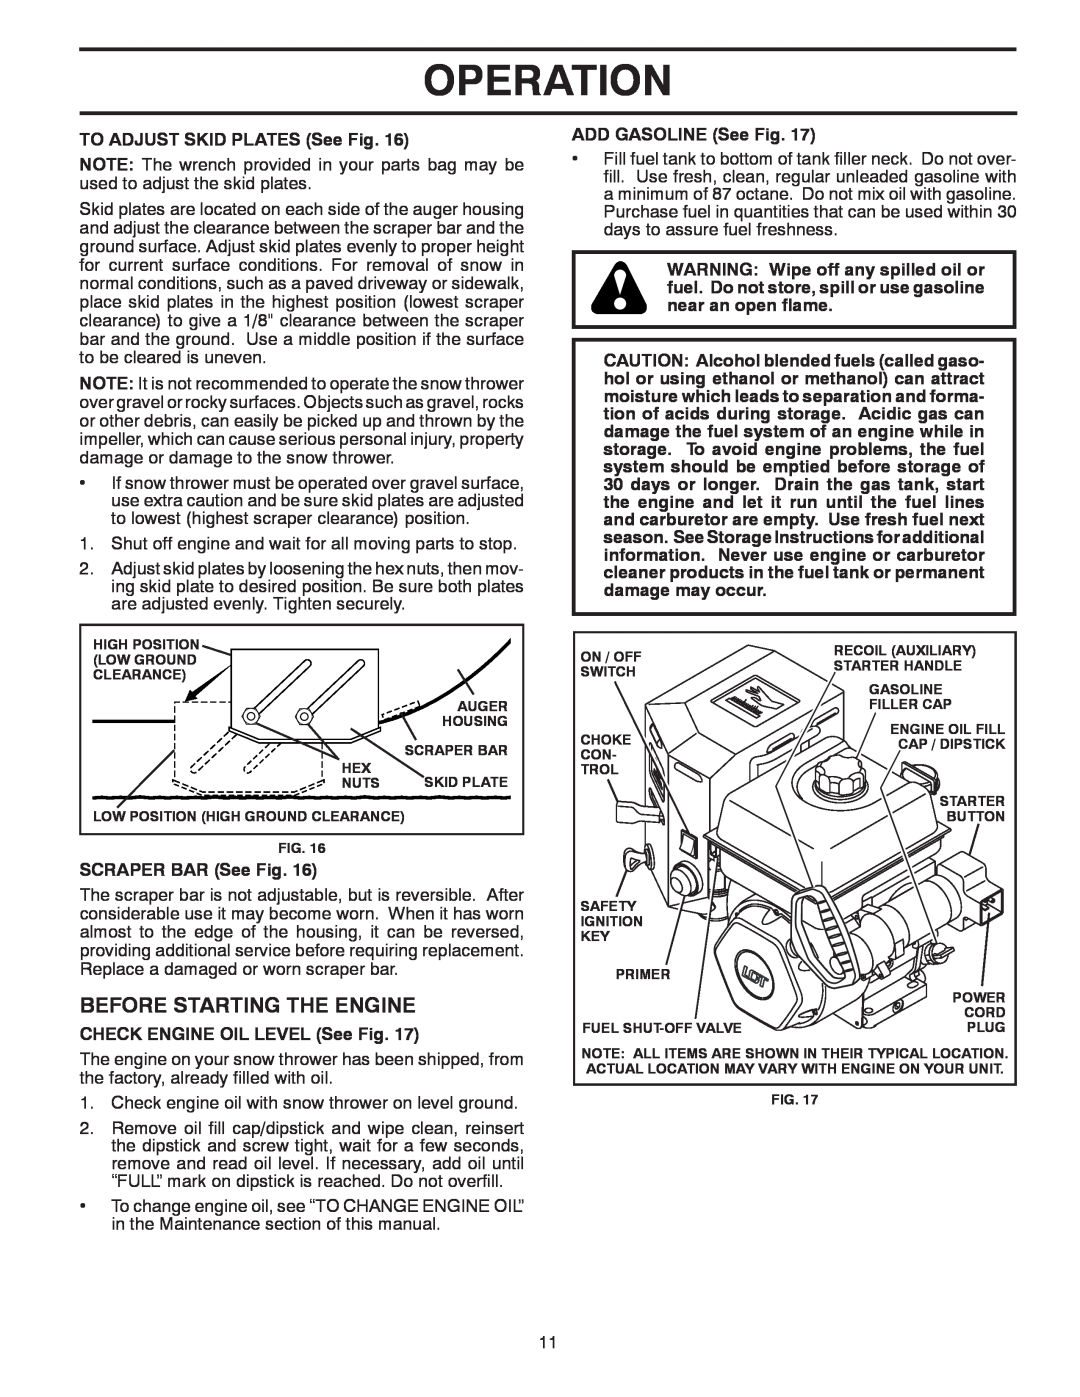 Poulan 96194000801, 428707 Before Starting The Engine, Operation, TO ADJUST SKID PLATES See Fig, SCRAPER BAR See Fig 